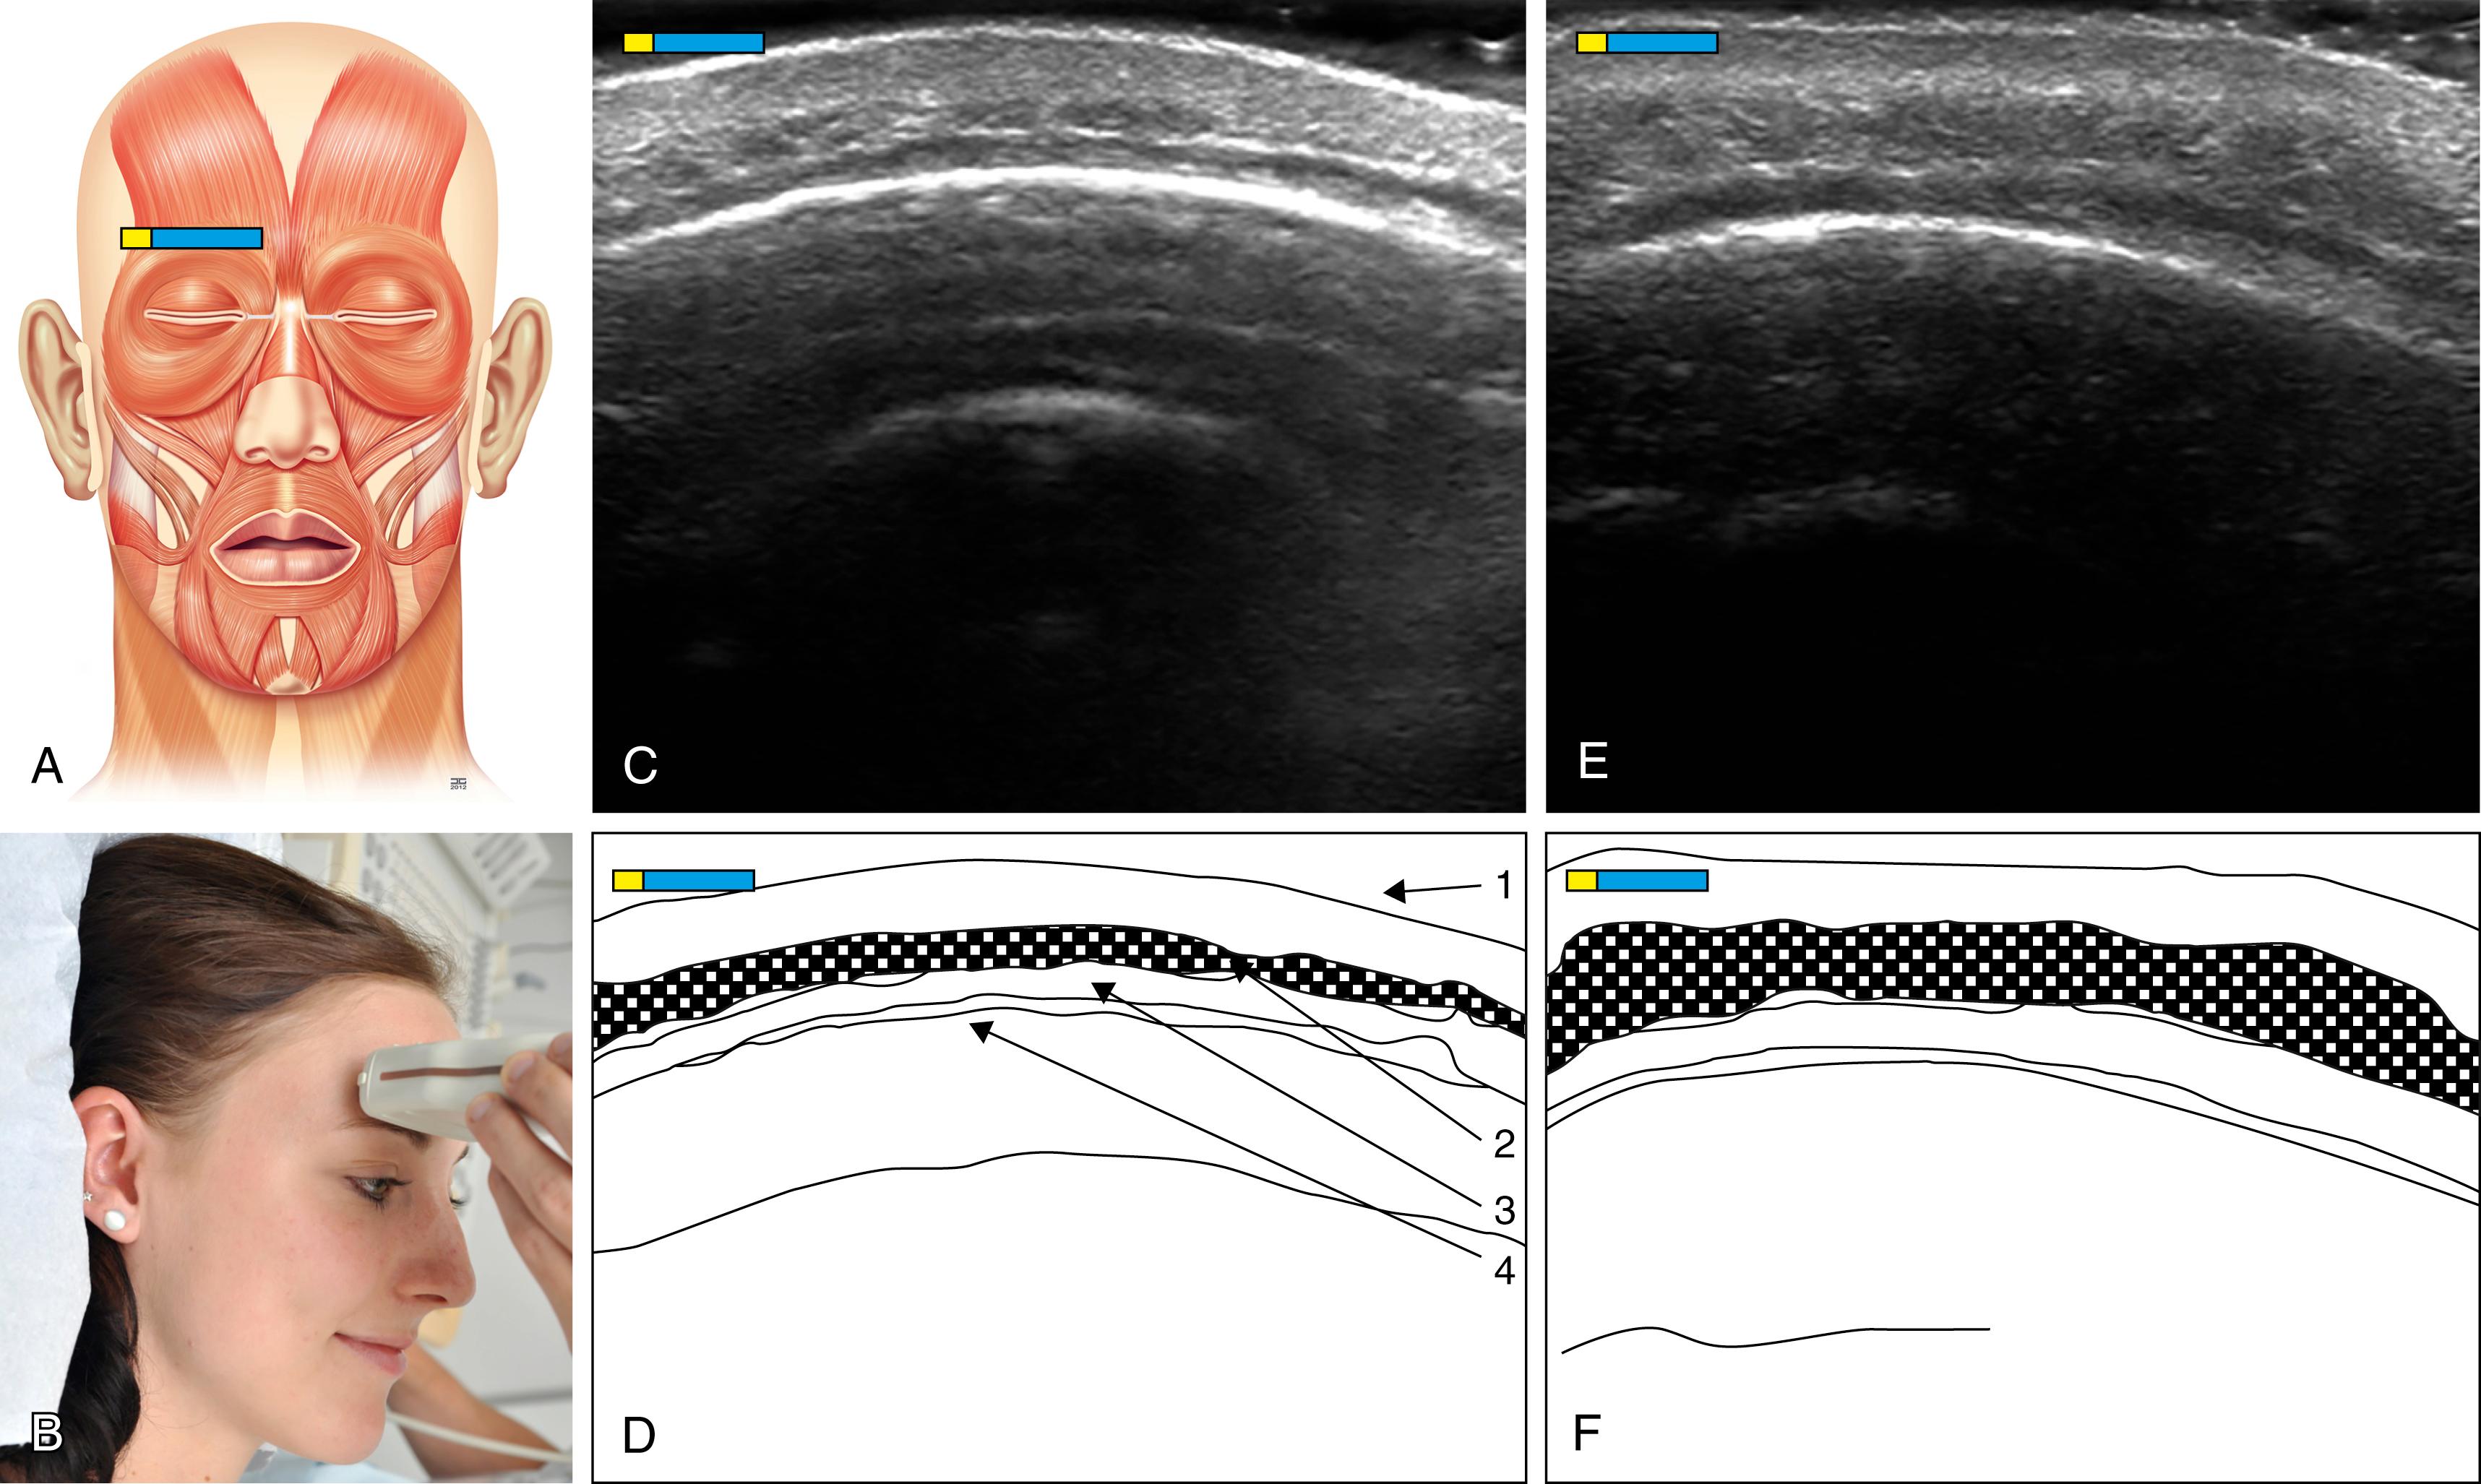 Fig. App.2, (A) Schematic representation of the mimic musculature with the marker over the venter frontalis, M. occipitofrontalis. (B) Photo, position of the ultrasound transducer cutting the venter frontalis. (C) Sonographic image of the venter frontalis in resting position. (D) Schematic representation of the venter frontalis in resting position: 1 outer skin; 2 venter frontalis, M. occipitofrontalis right side; 3 subaponeurotic/subgaleal displacement gap; 4 os frontale. (E) Sonographic image of the frontalis at maximum contraction. (F) Schematic representation of the M. frontalis at maximum contraction.